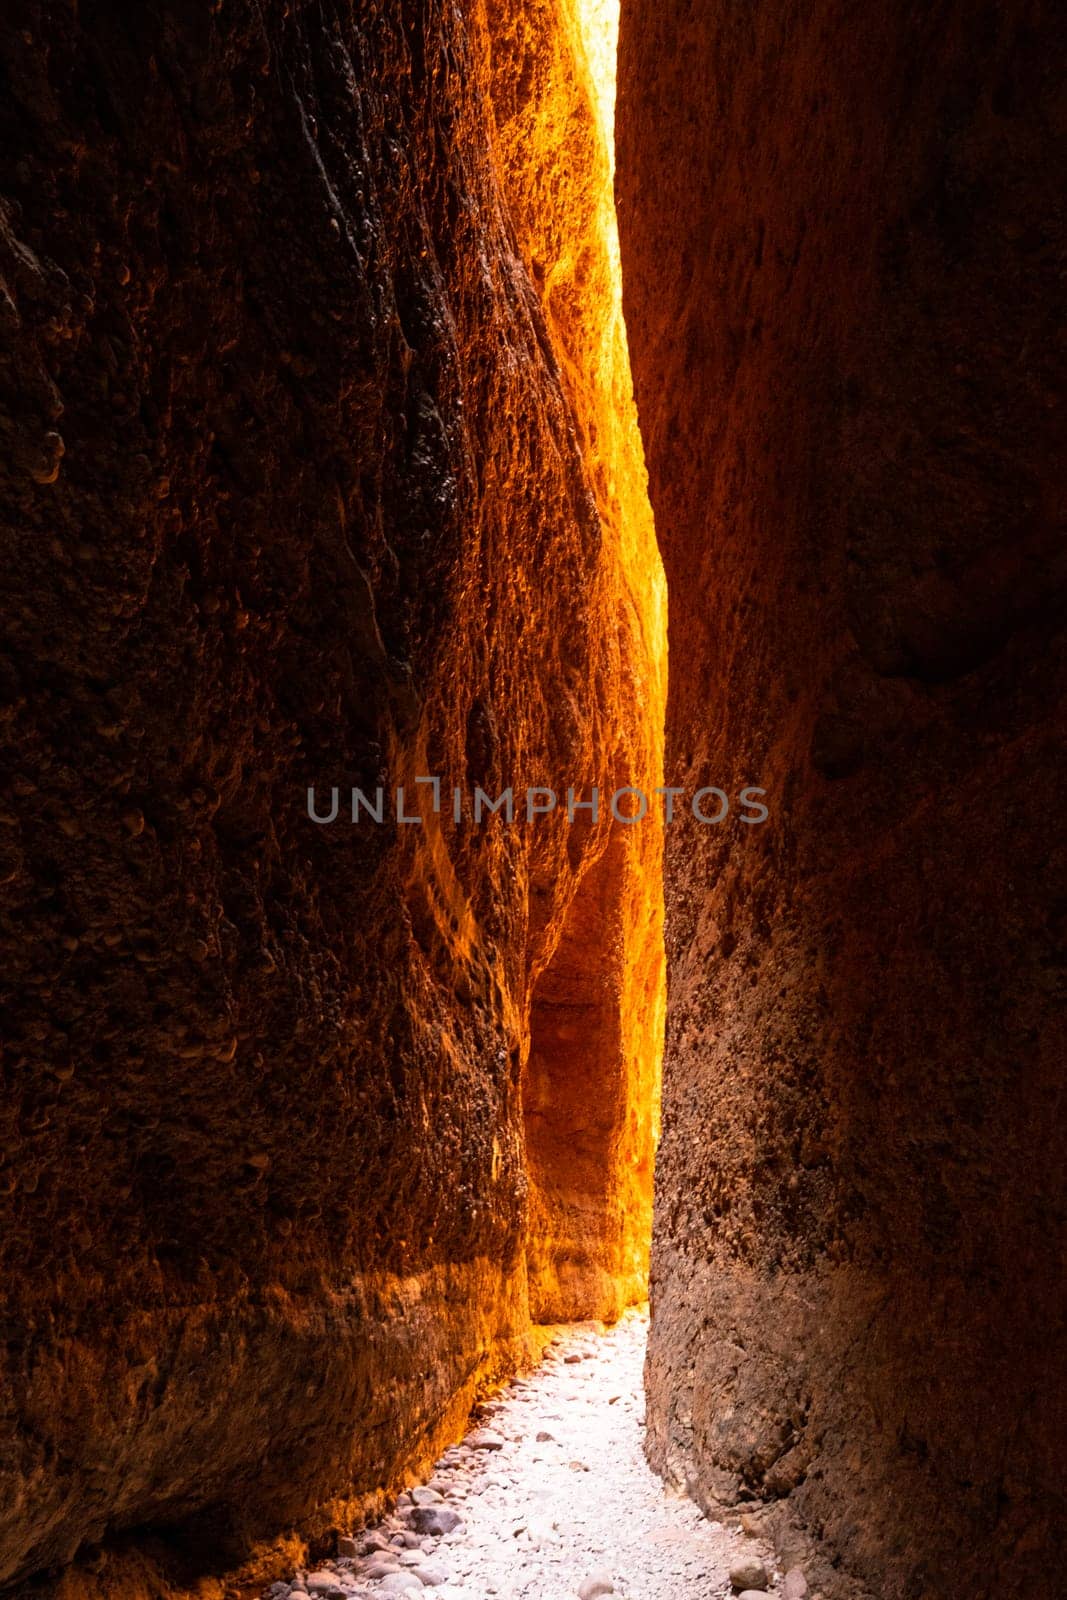 Sunlight pouring in at Echidna Chasm, Bungle Bungles, Purnululu, WA by StefanMal